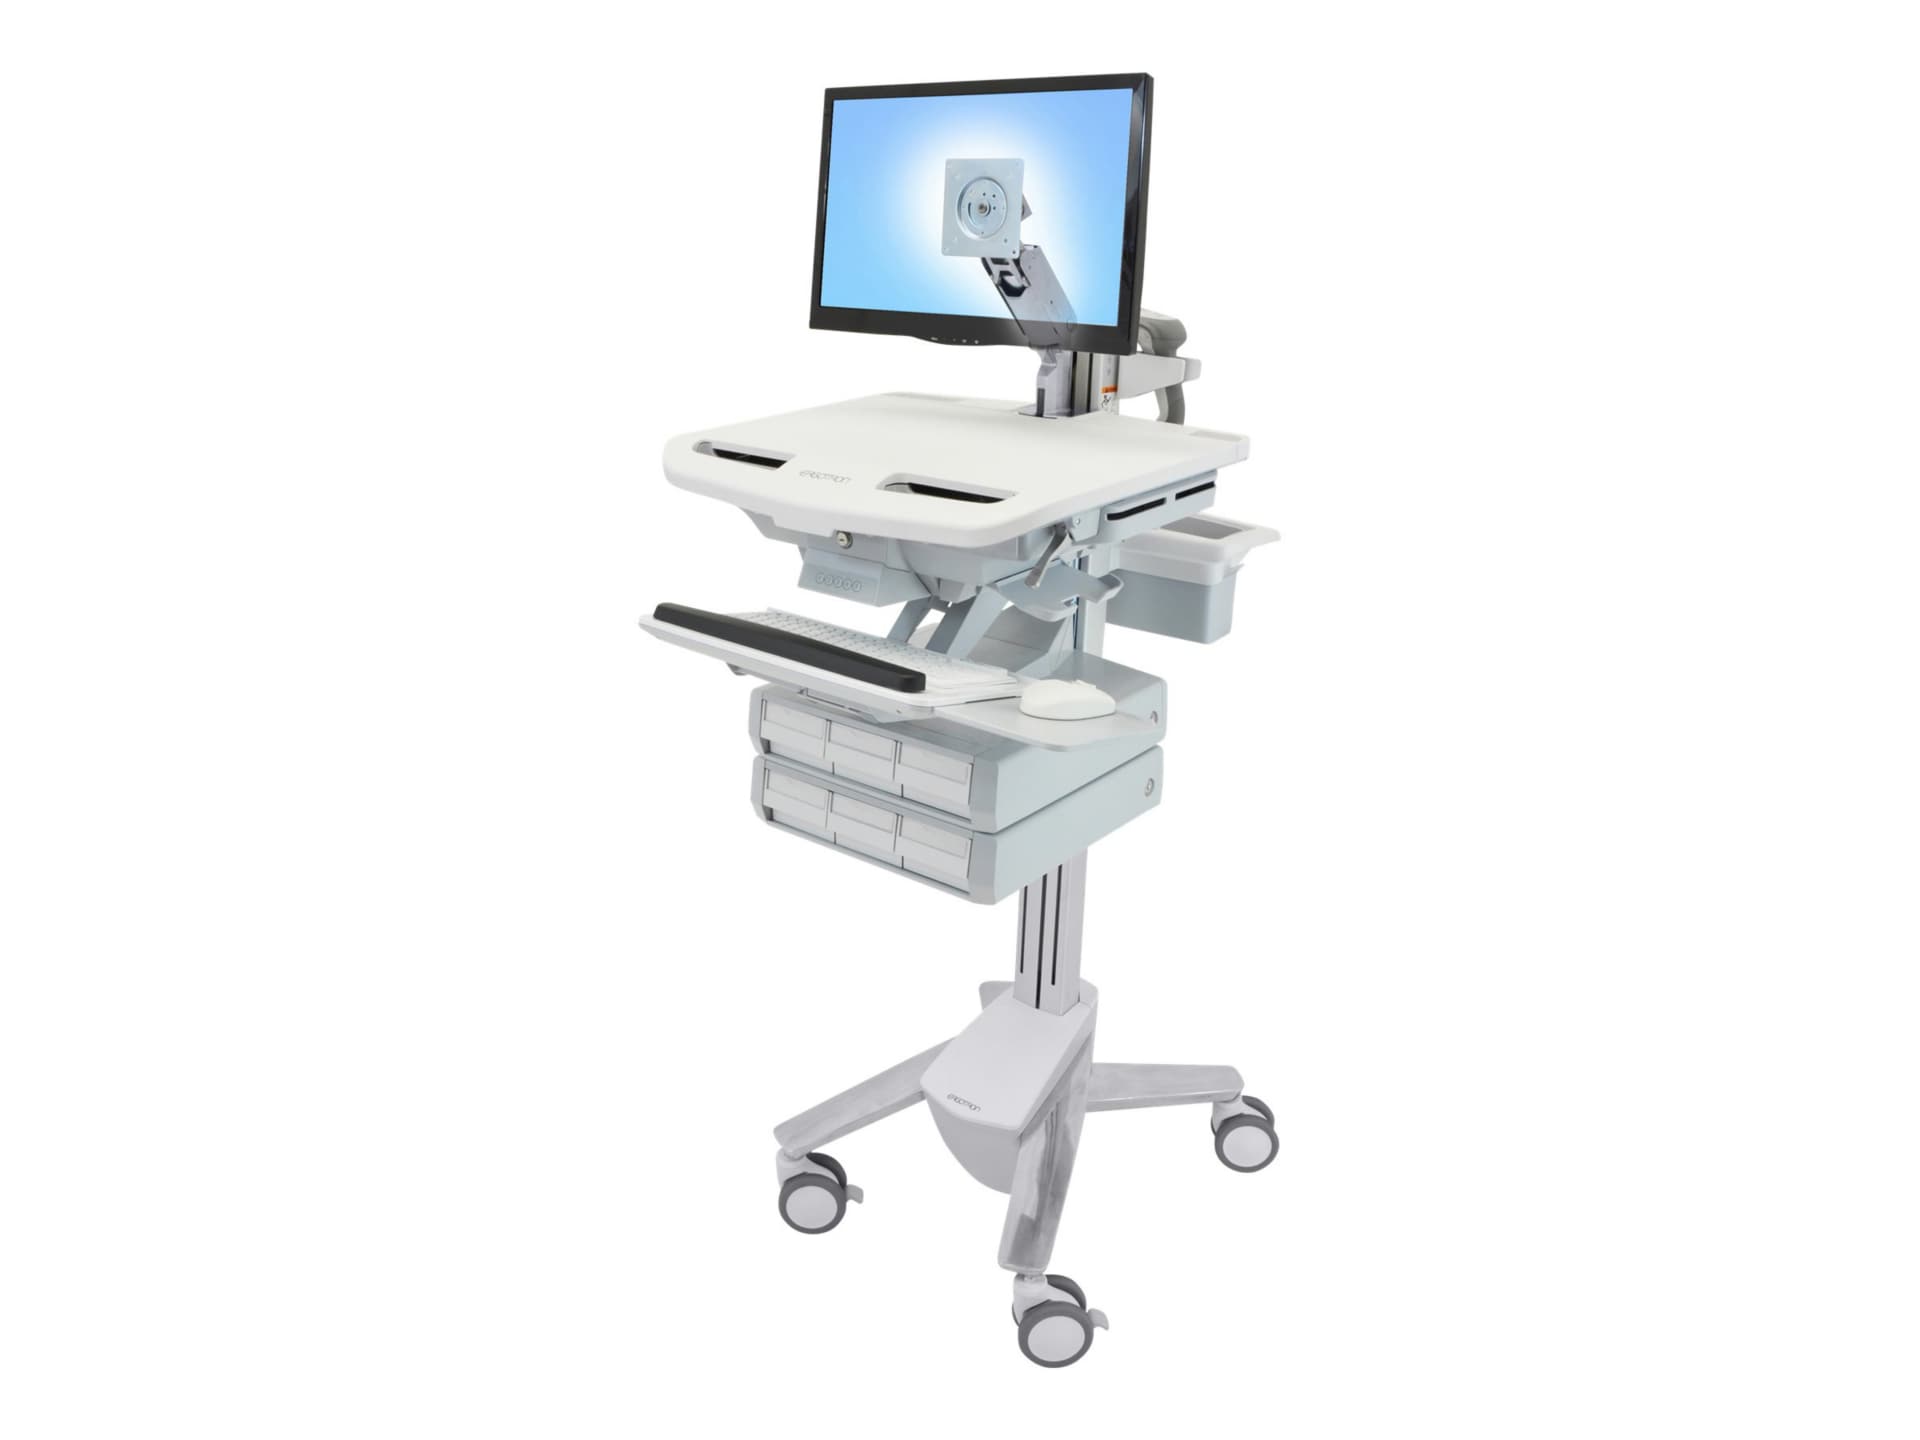 Ergotron StyleView - cart - open architecture - for LCD display / keyboard